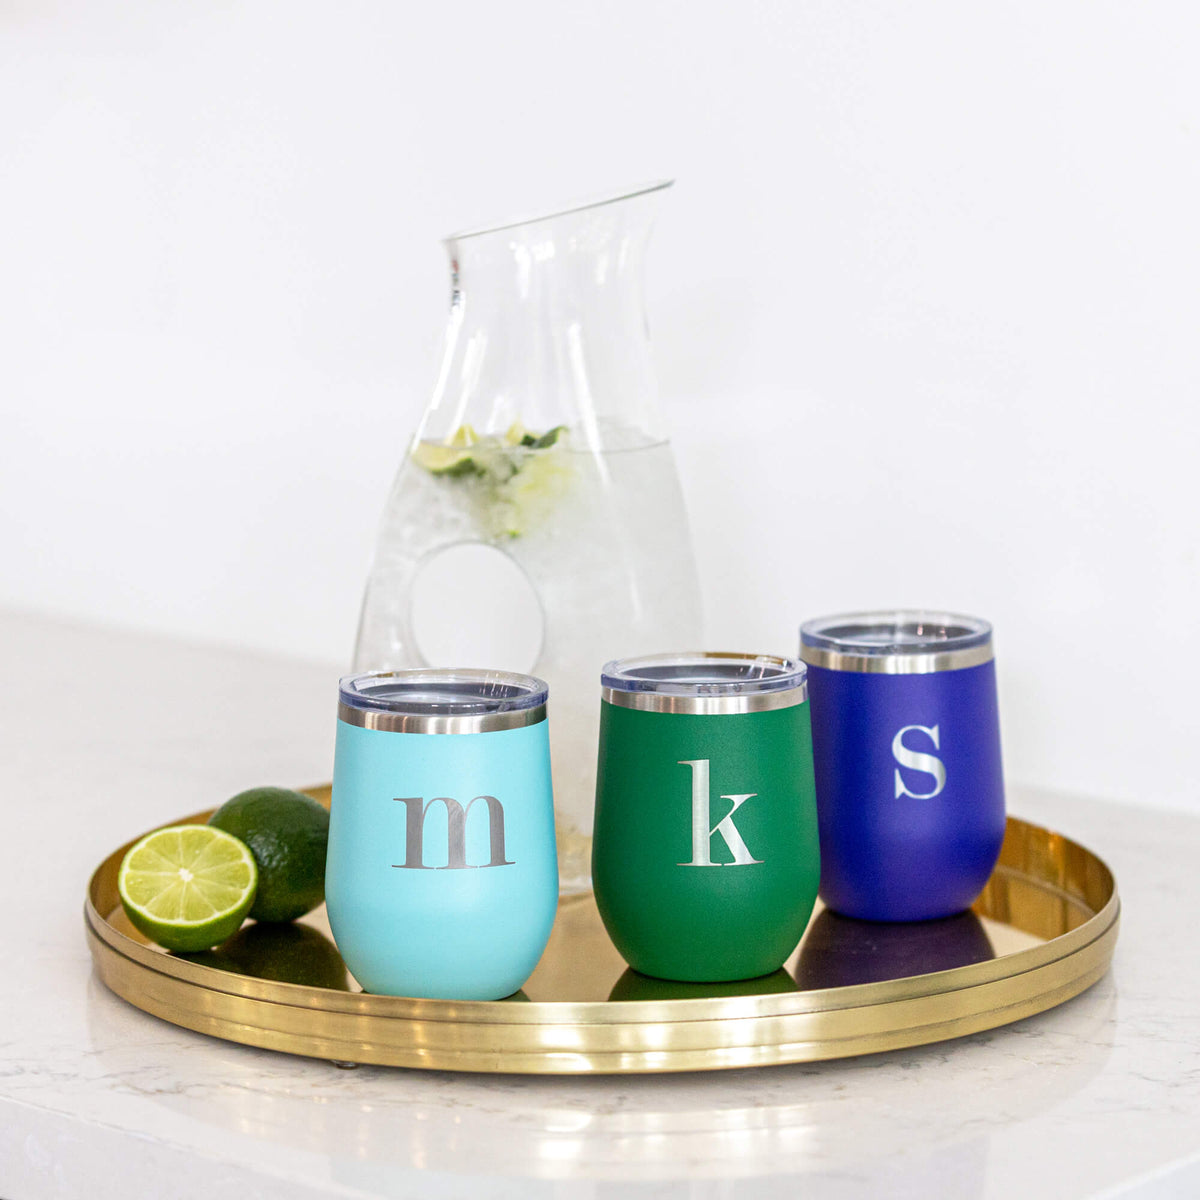 Golf Tumbler Cups - Golf Tumbler Engraved with an Initial - Love, Georgie